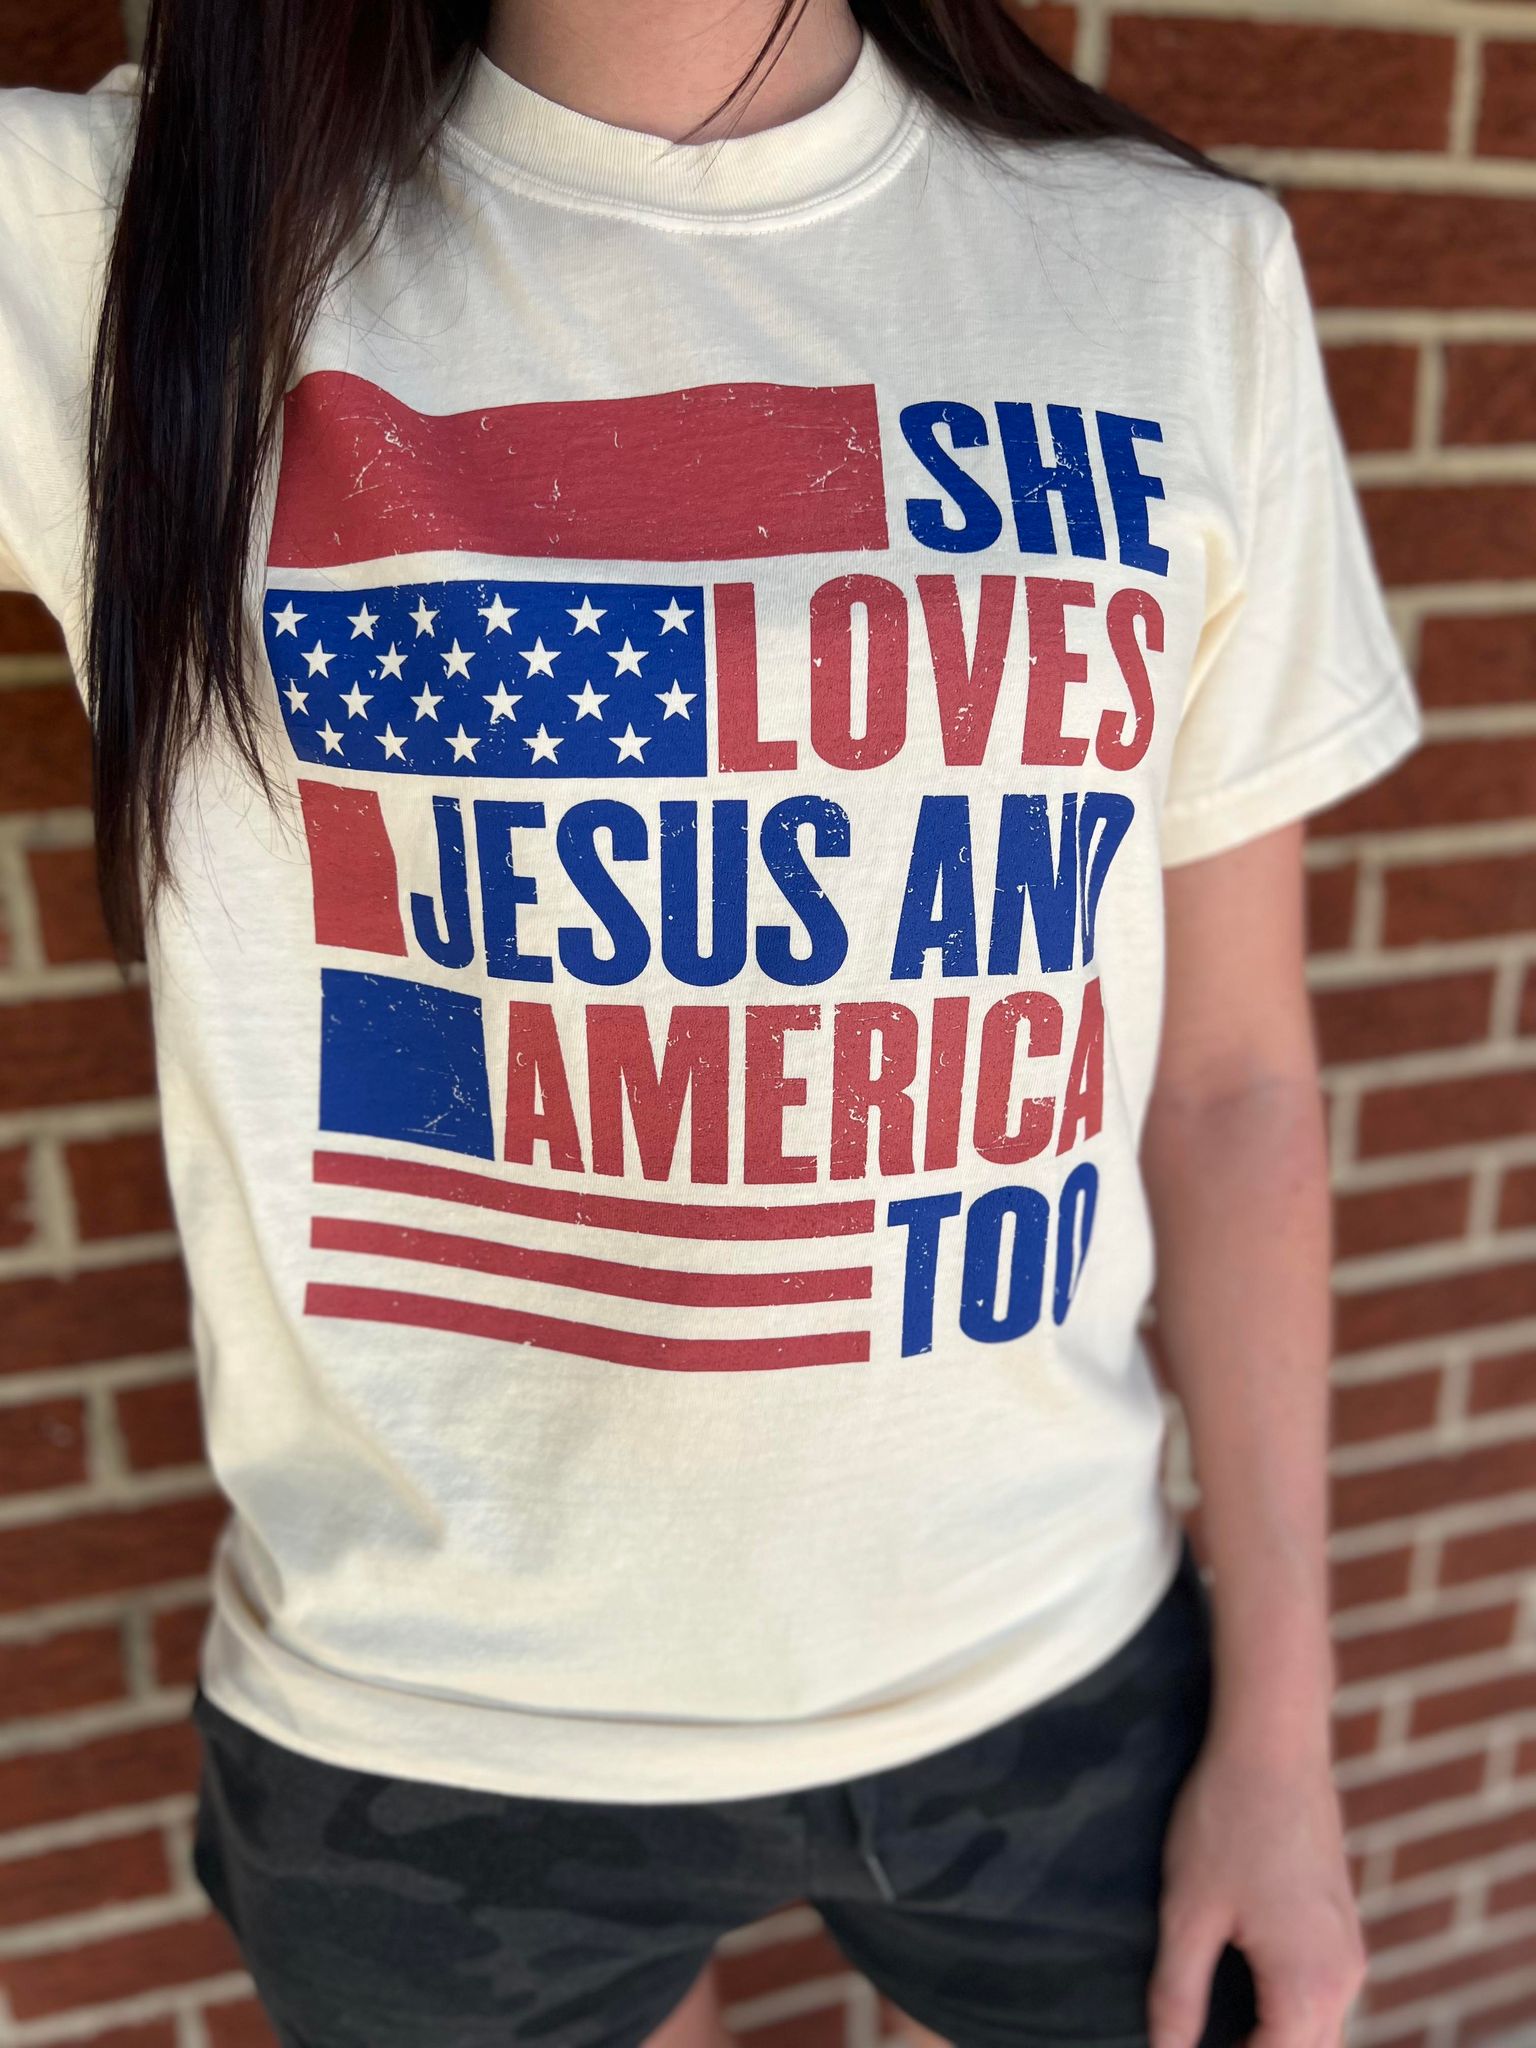 She Loves Jesus and America Too Tee- ASK Apparel LLC